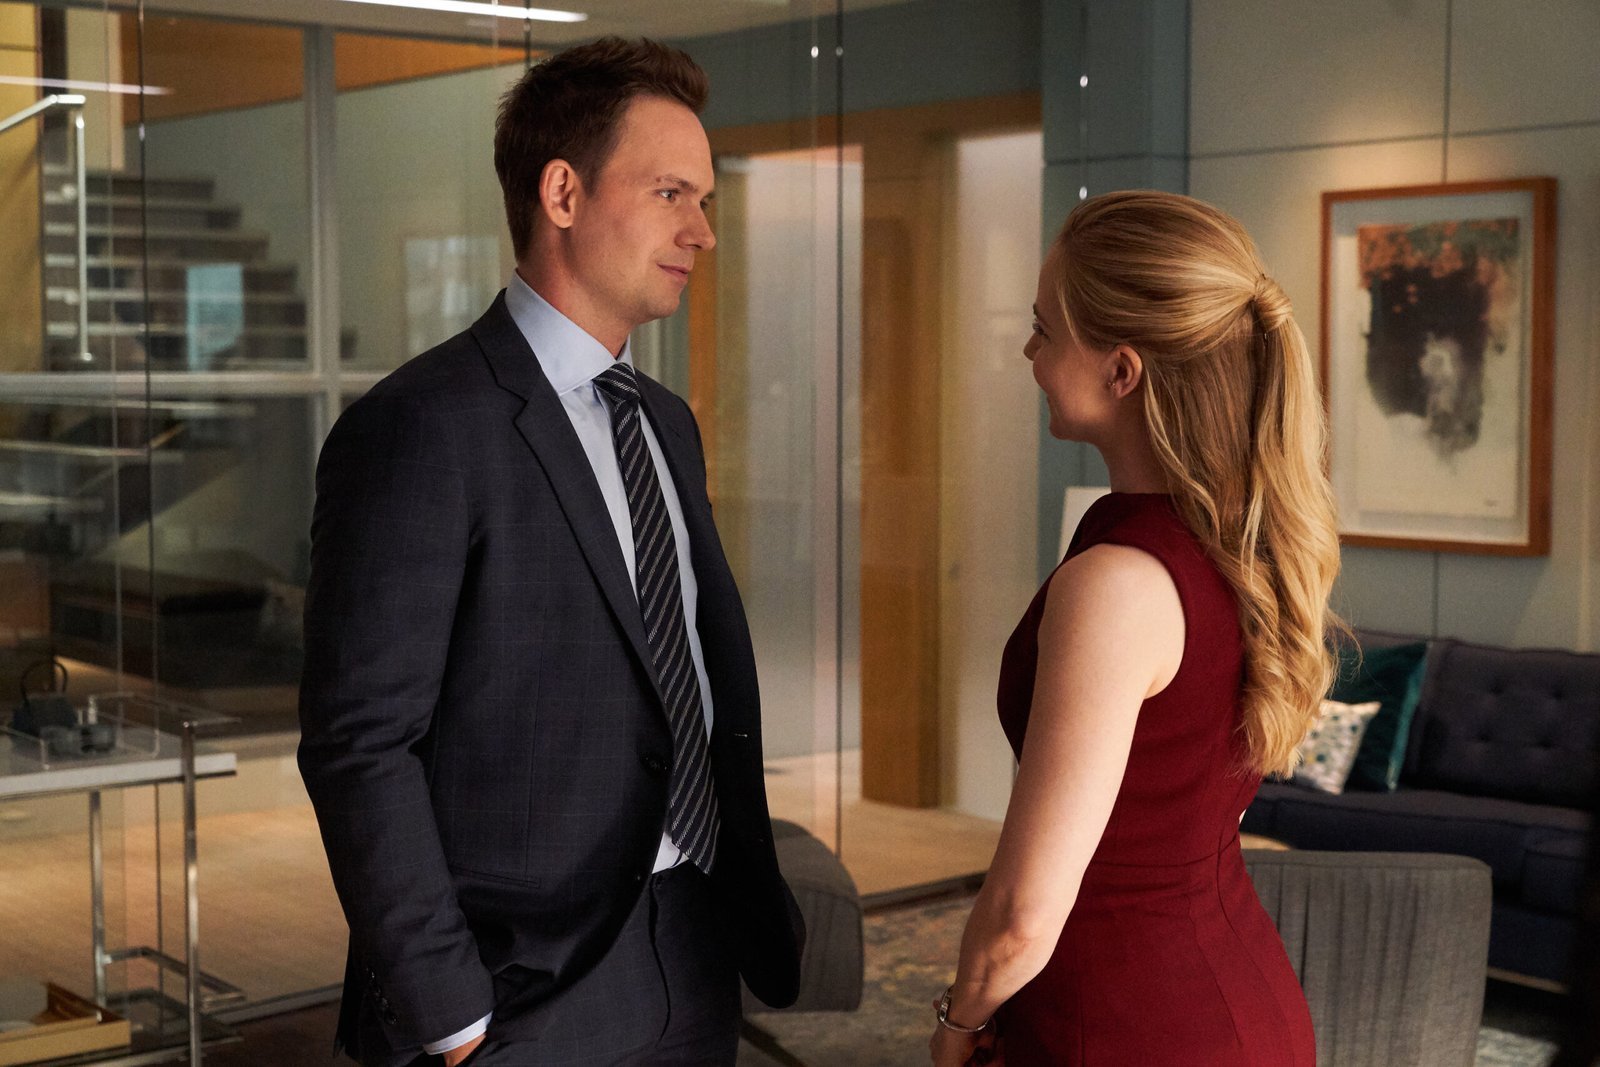 'Suits' Returns With A New Spin